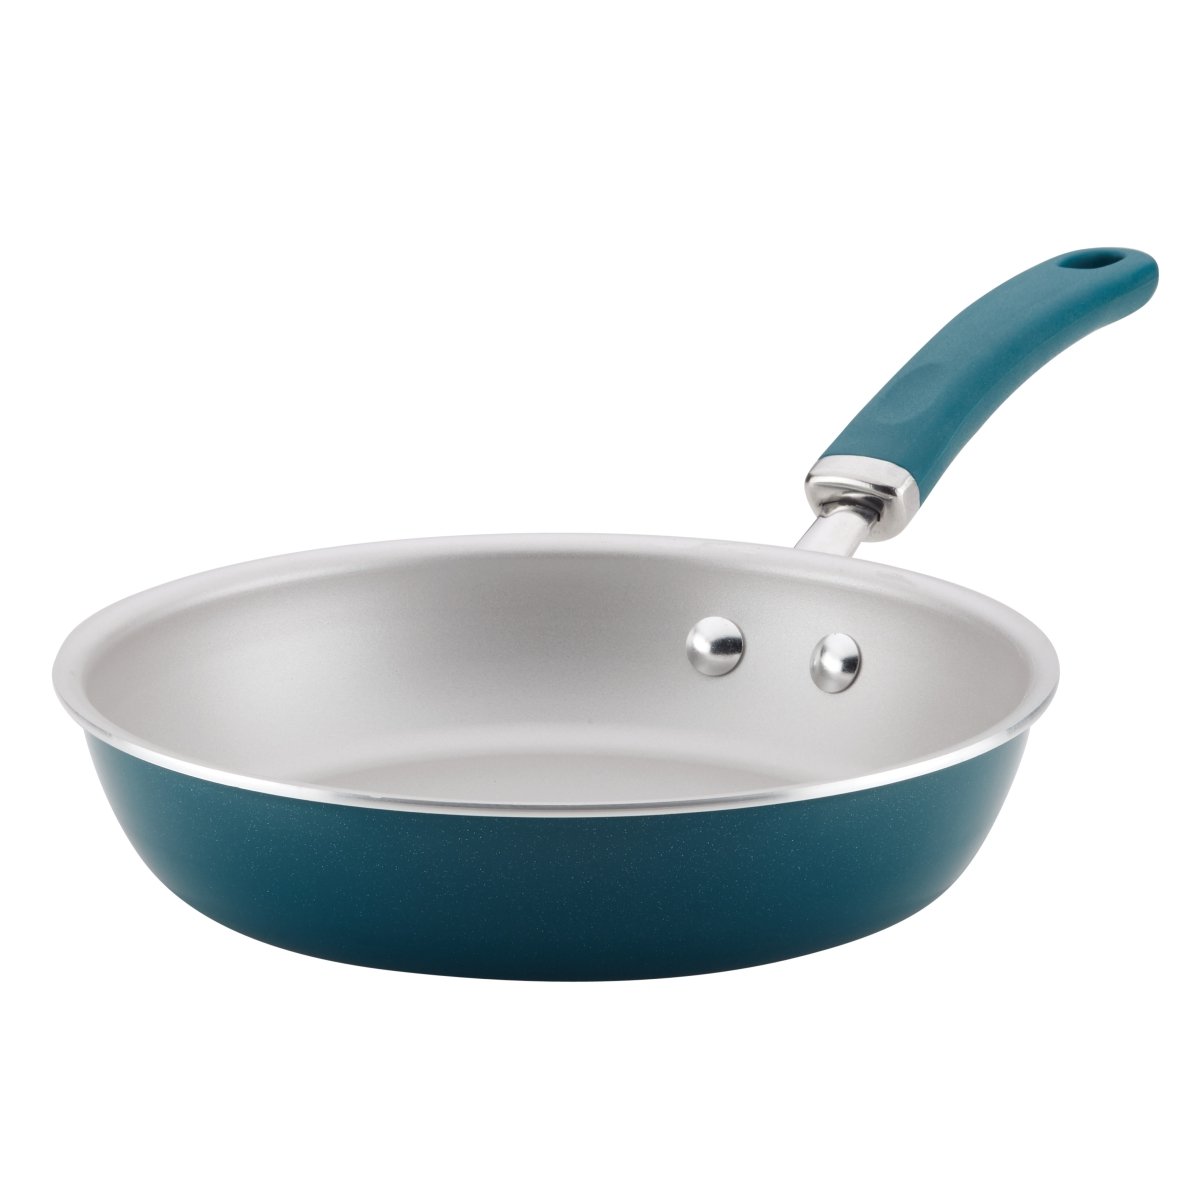 12010 Create Delicious Aluminum Nonstick Deep Skillet, 9.5 In. - Teal Shimmer